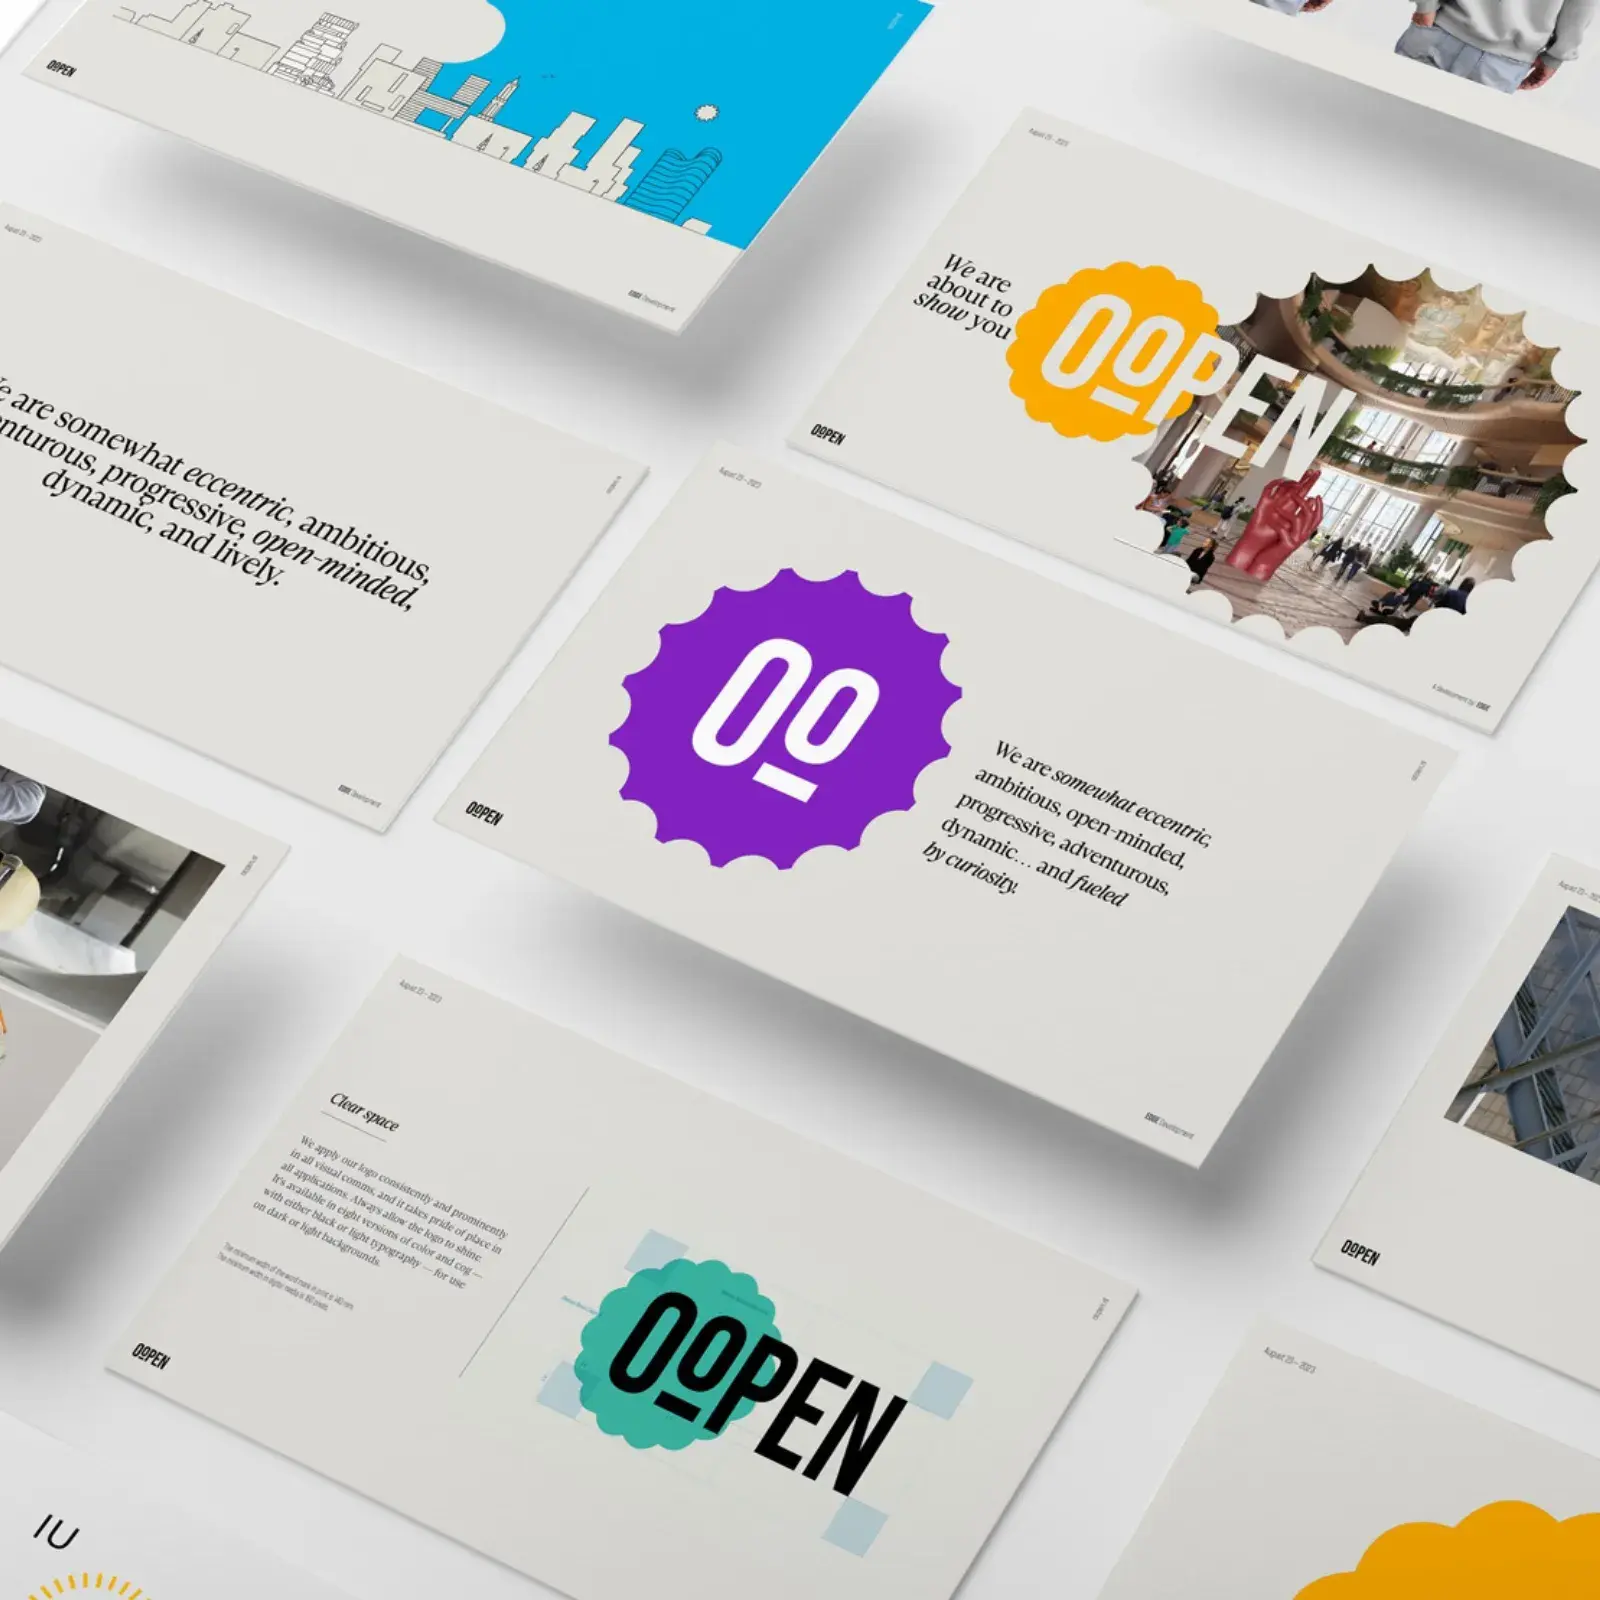 Exploring Oopen’s Branding and Visual Identity Design